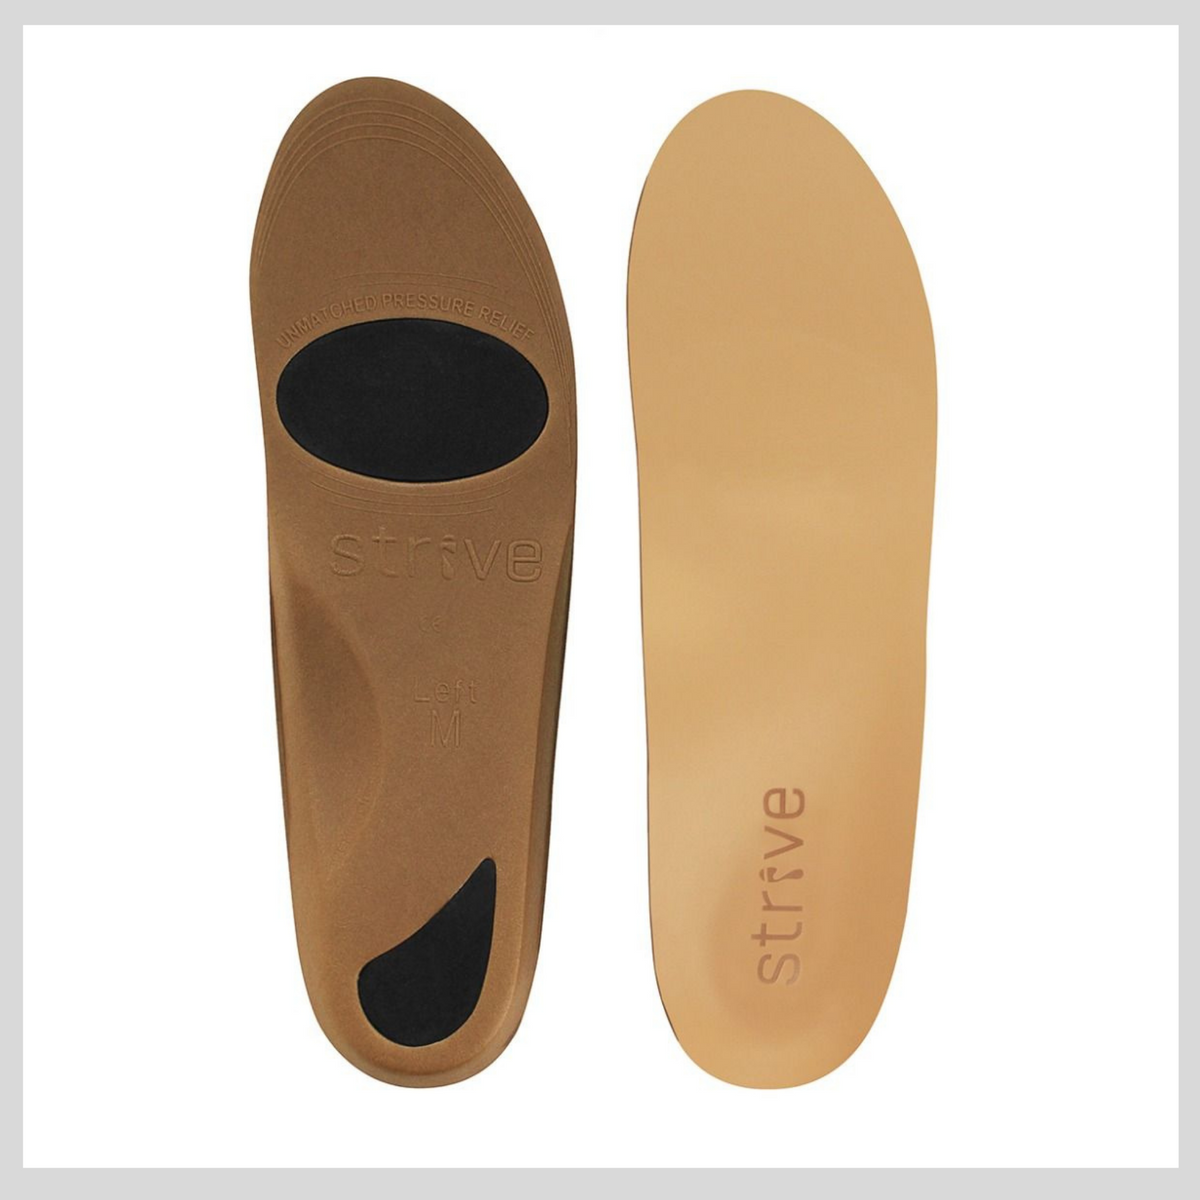 Strive Orthotic Comfort Insole